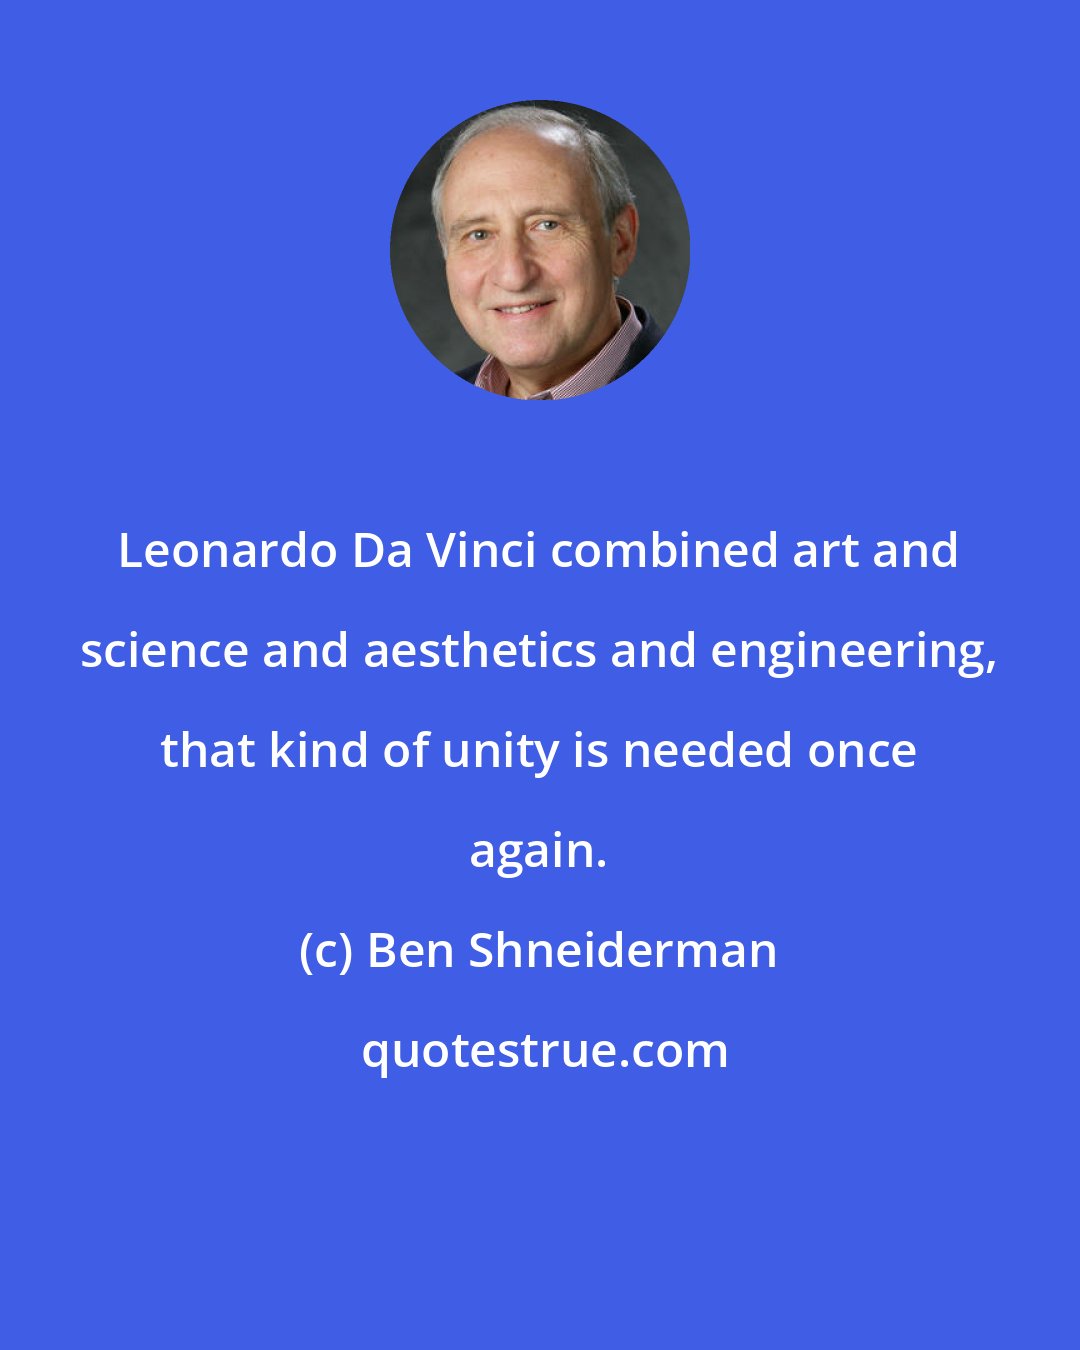 Ben Shneiderman: Leonardo Da Vinci combined art and science and aesthetics and engineering, that kind of unity is needed once again.